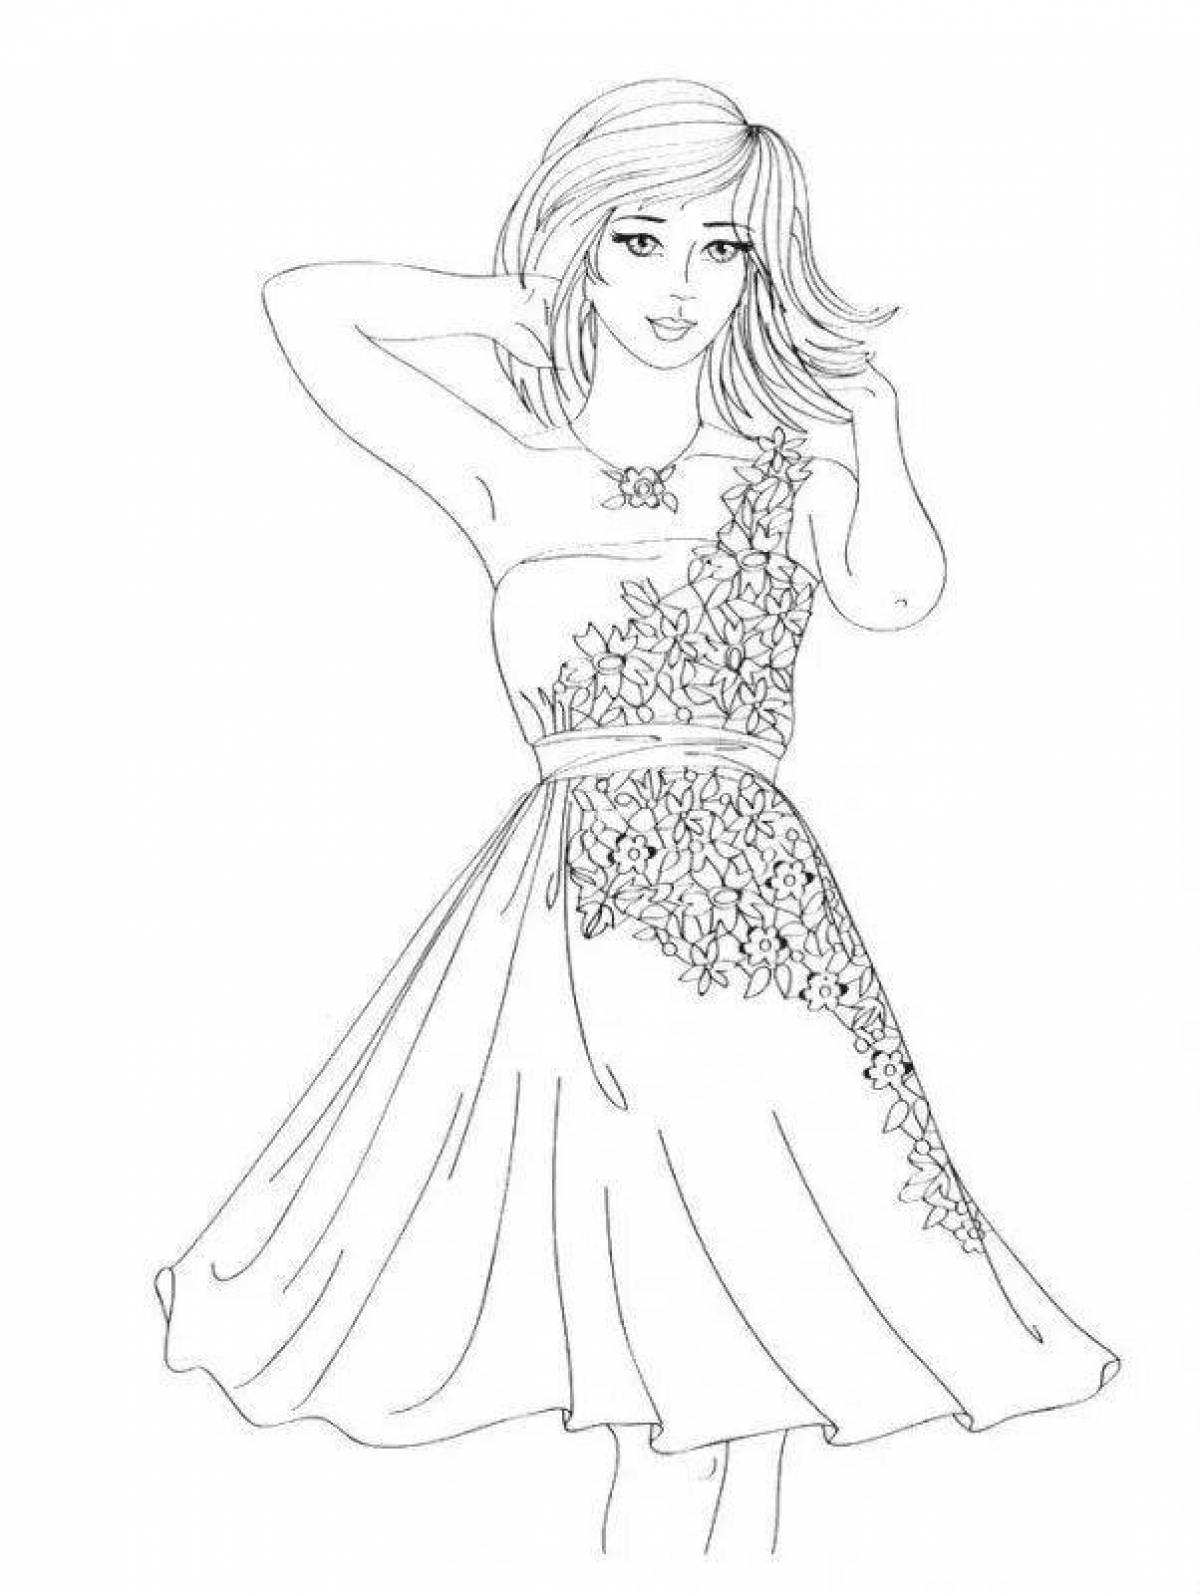 Charming coloring page of a girl in a dress